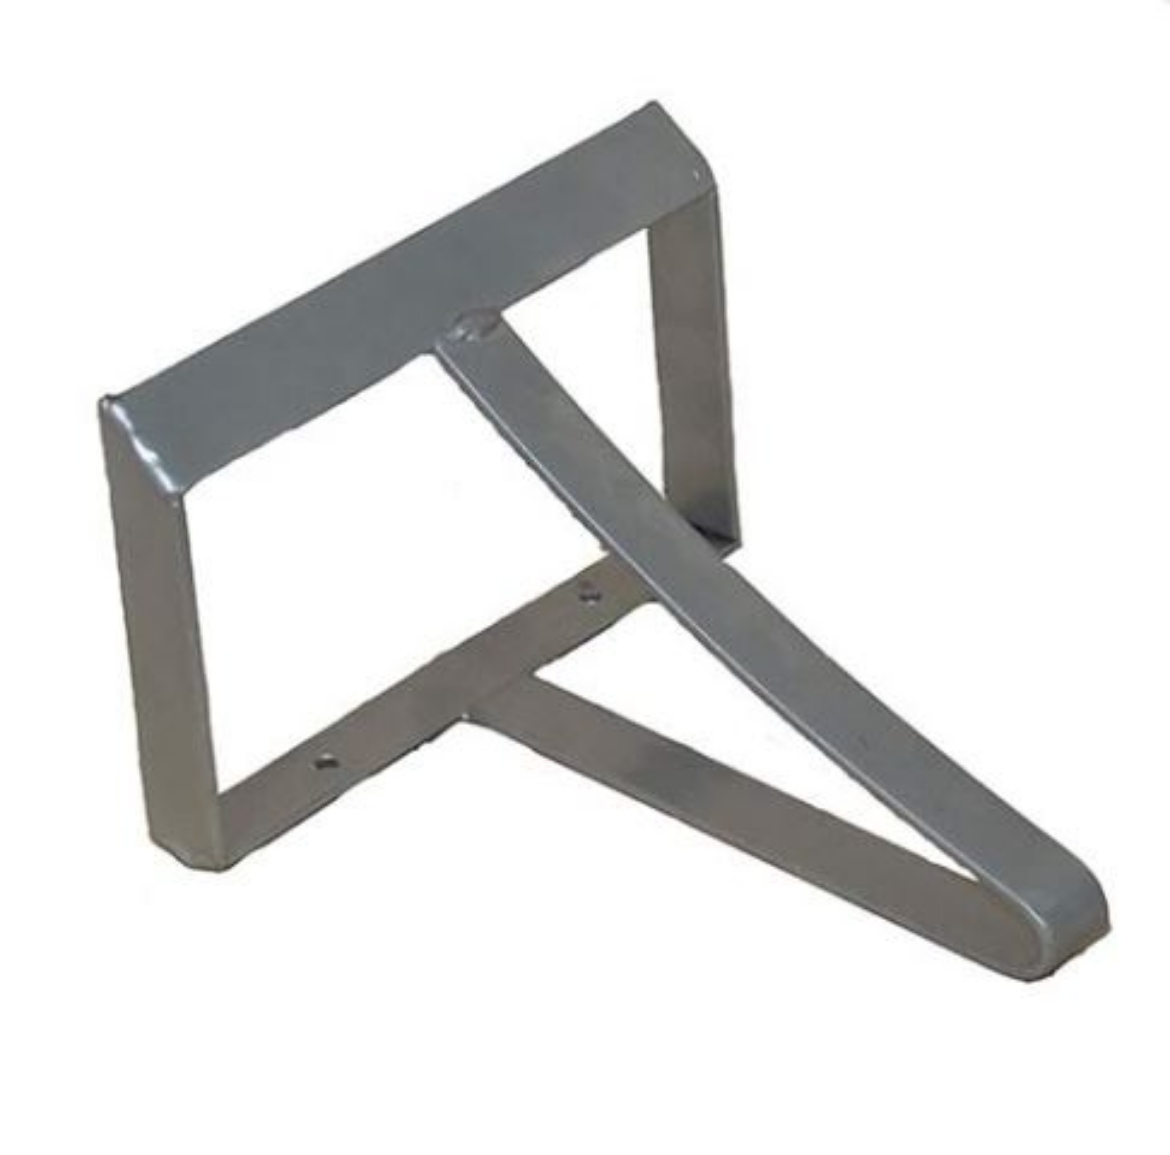 Picture of Metal Bracket to Suit 10774 Urethane Wheel Chock 
310mm (W) x 150mm (D) x 60mm (H)
Has 2 Holes in Bracket for Bolting Down
Grey in Colour